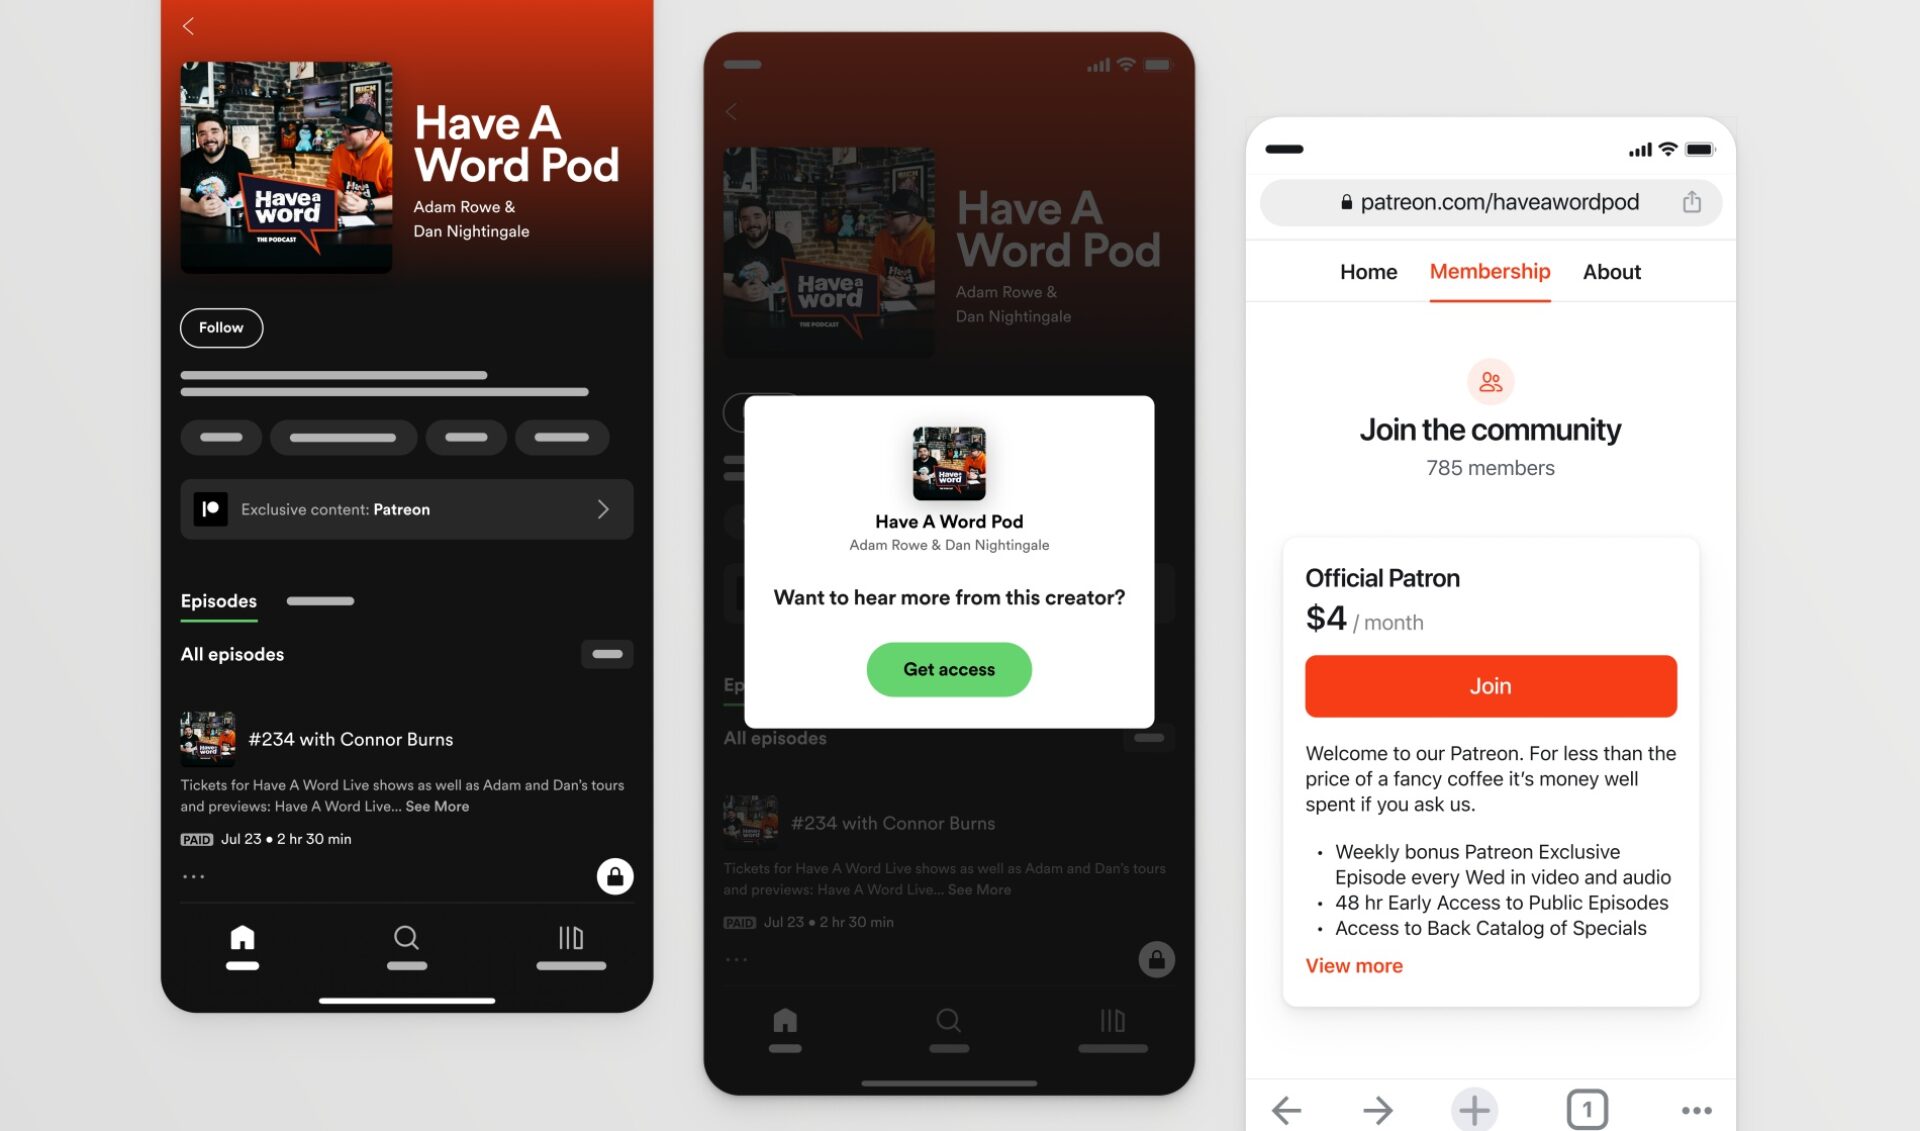 Patreon’s paywalls can now be integrated with Spotify